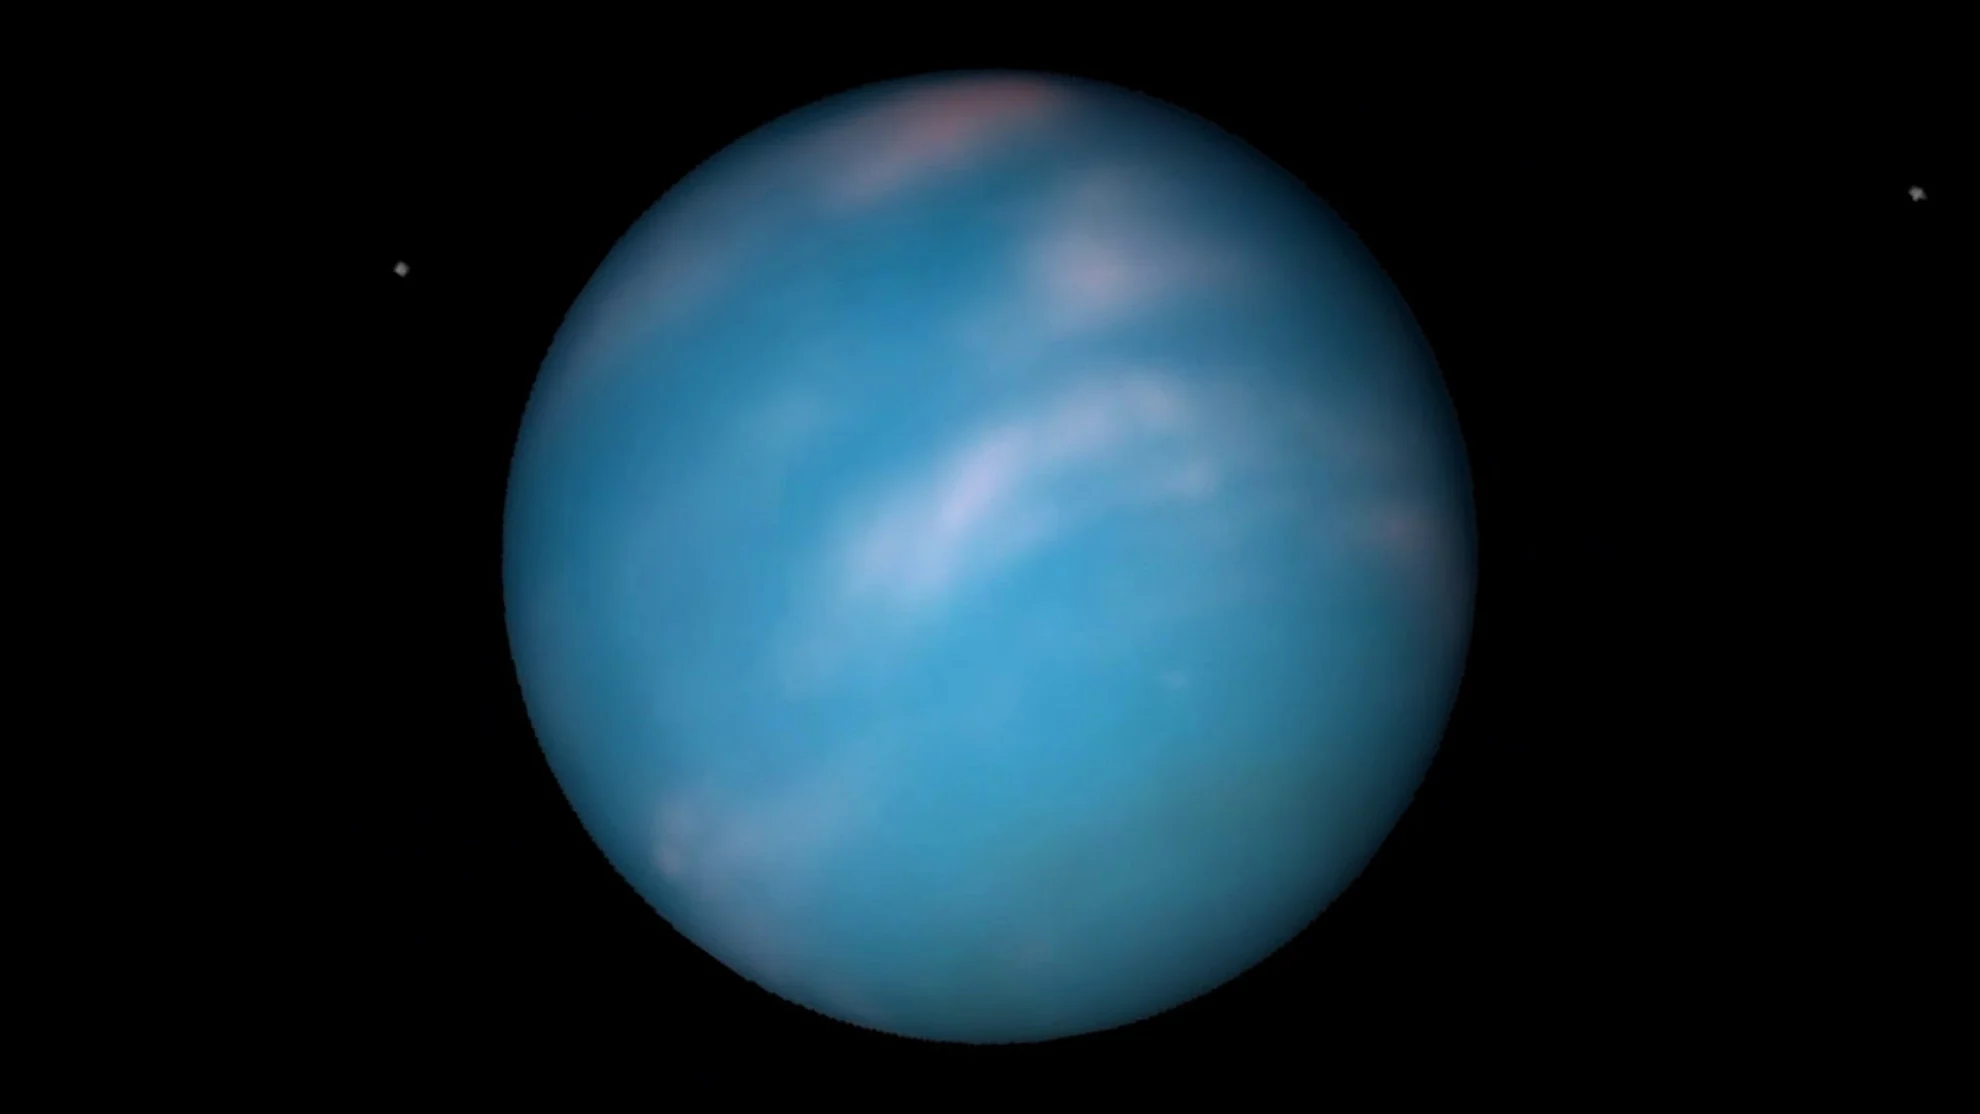 Space weather spawns bright clouds in Neptune's atmosphere